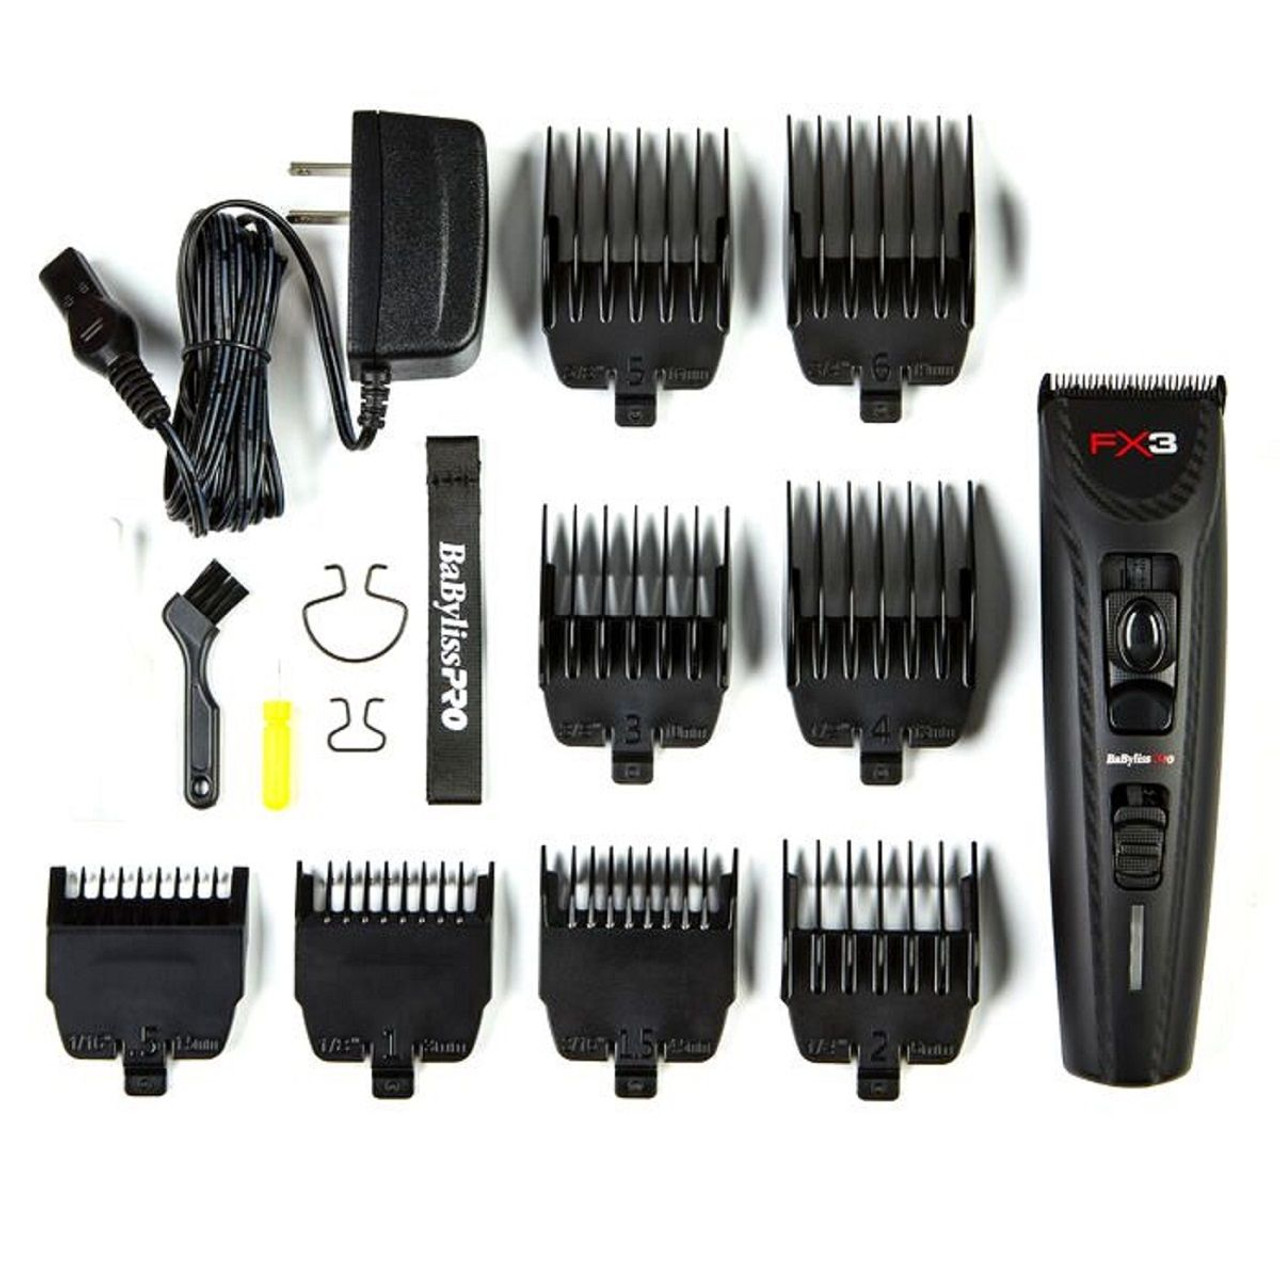 BaByliss PRO FX3 Cordless Trimmer